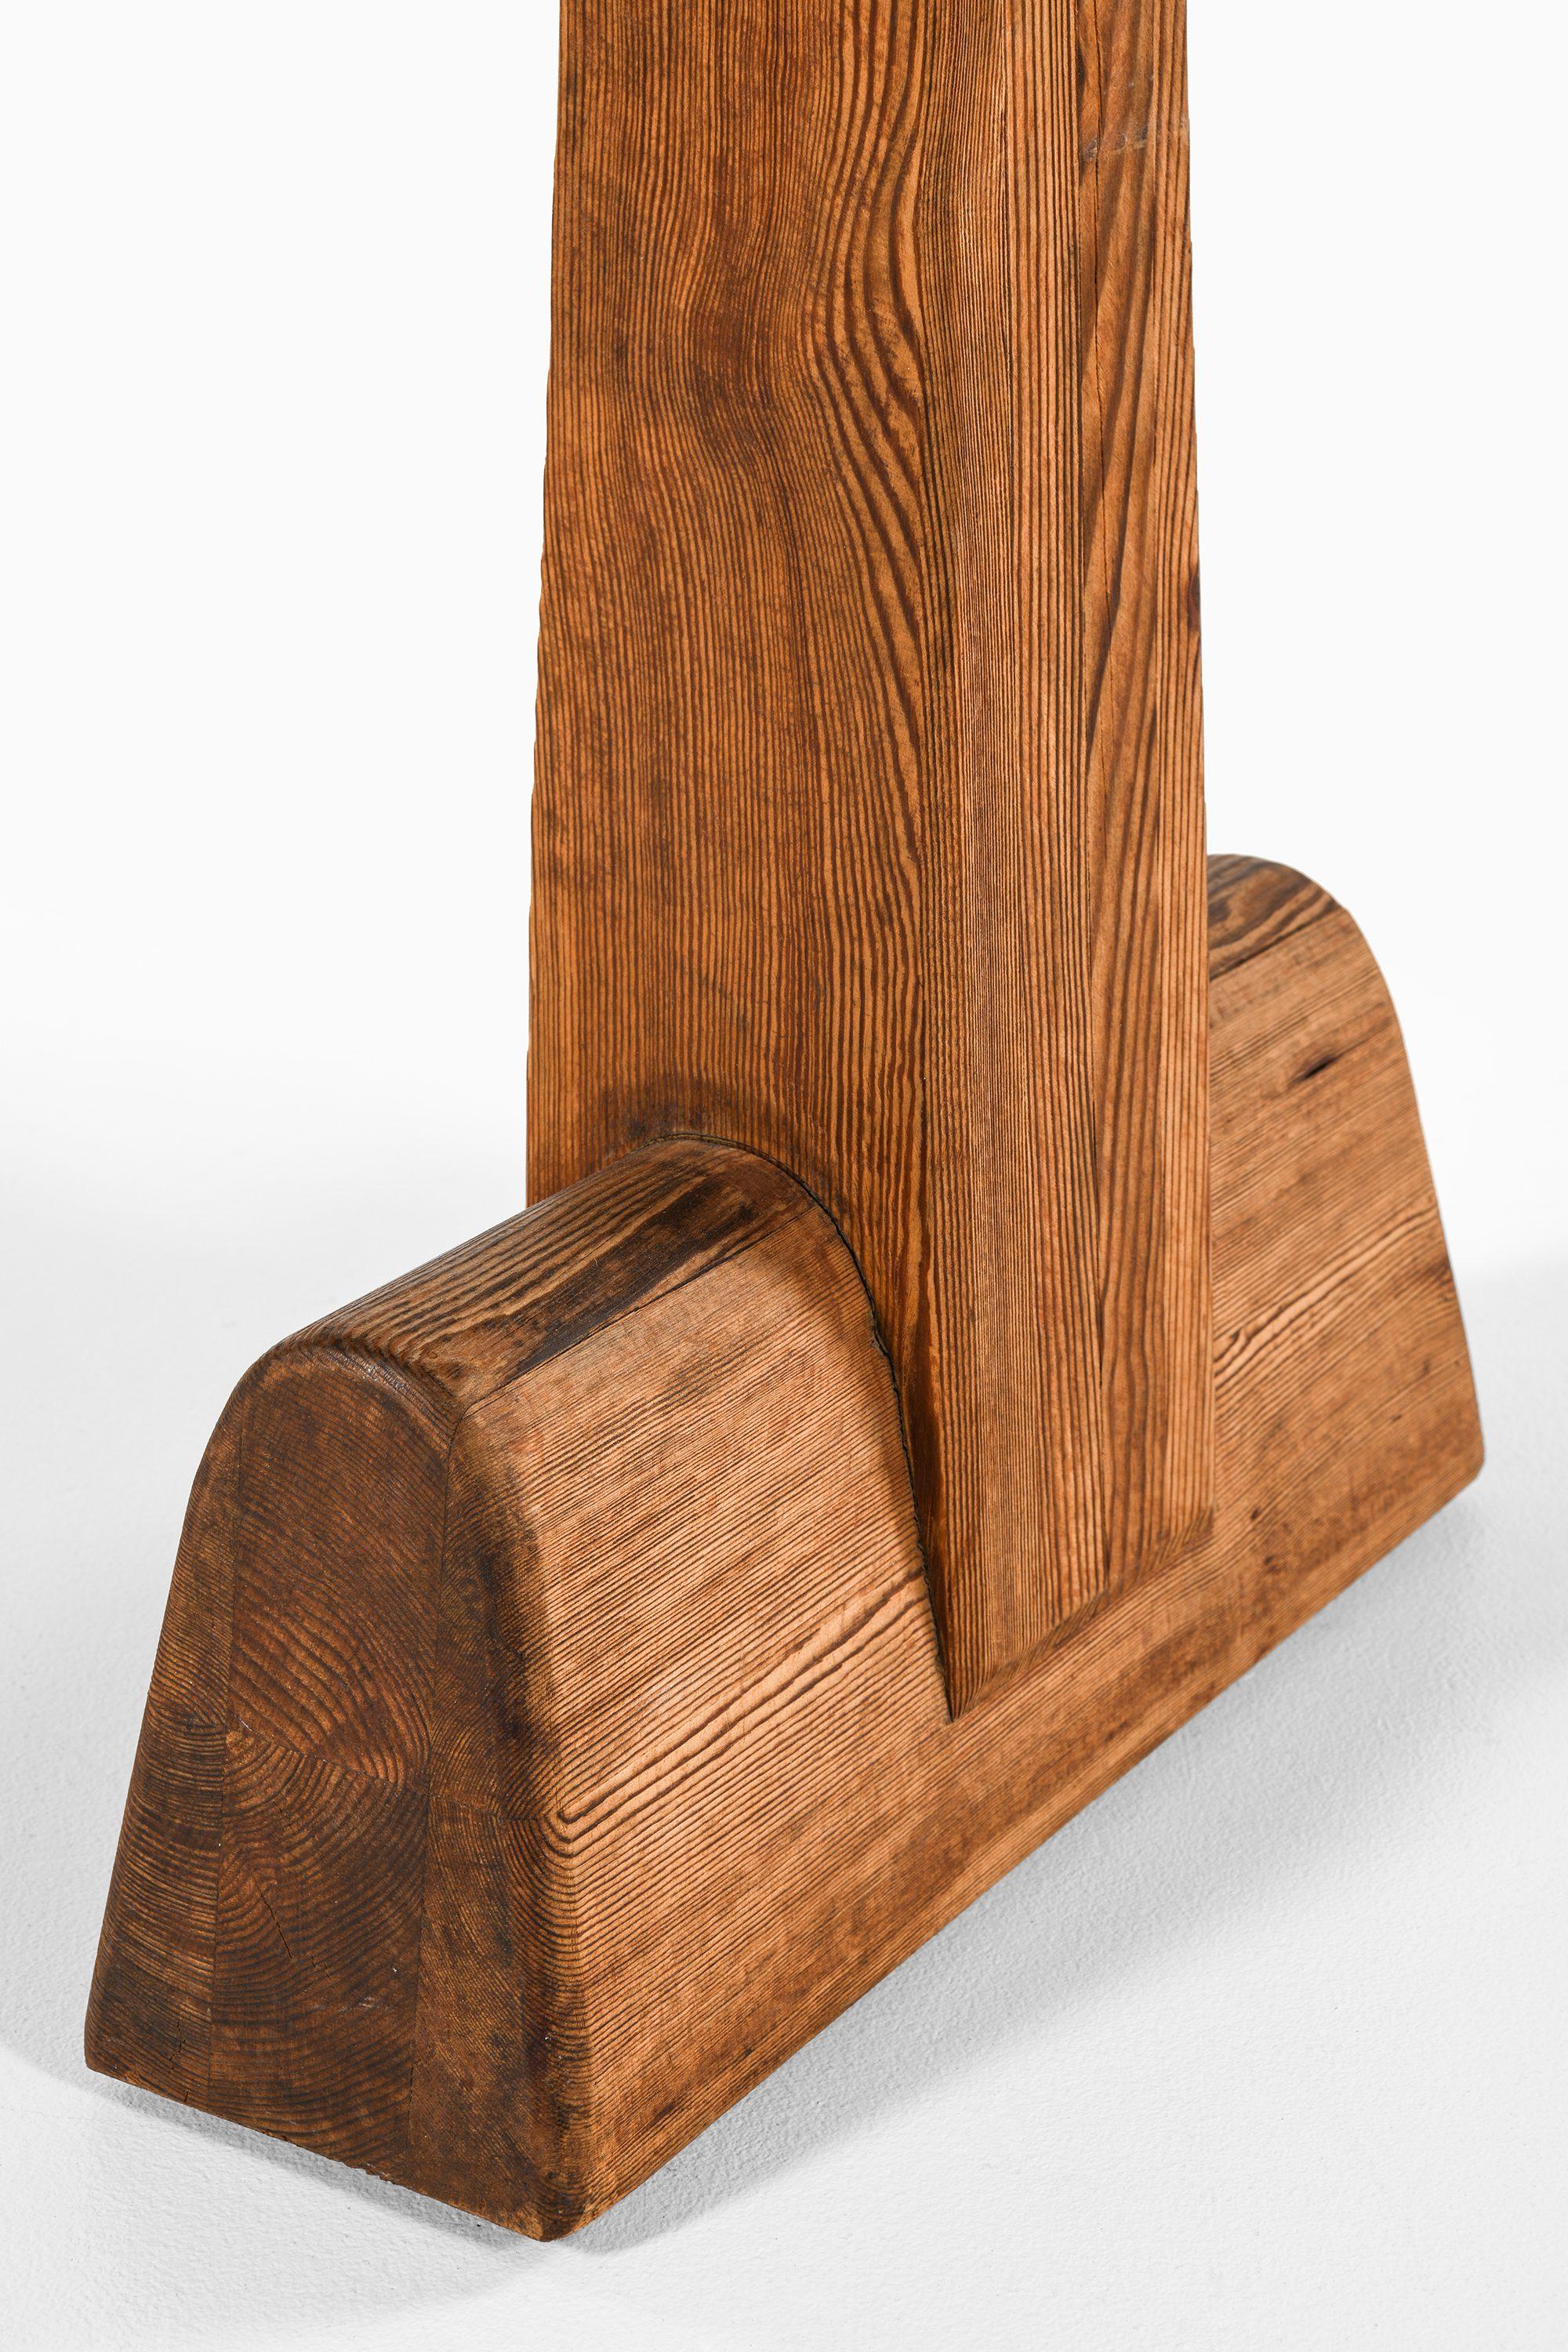 Library / Console Table in Acid-Stained Pine by Axel Einar Hjorth, 1932 For Sale 4